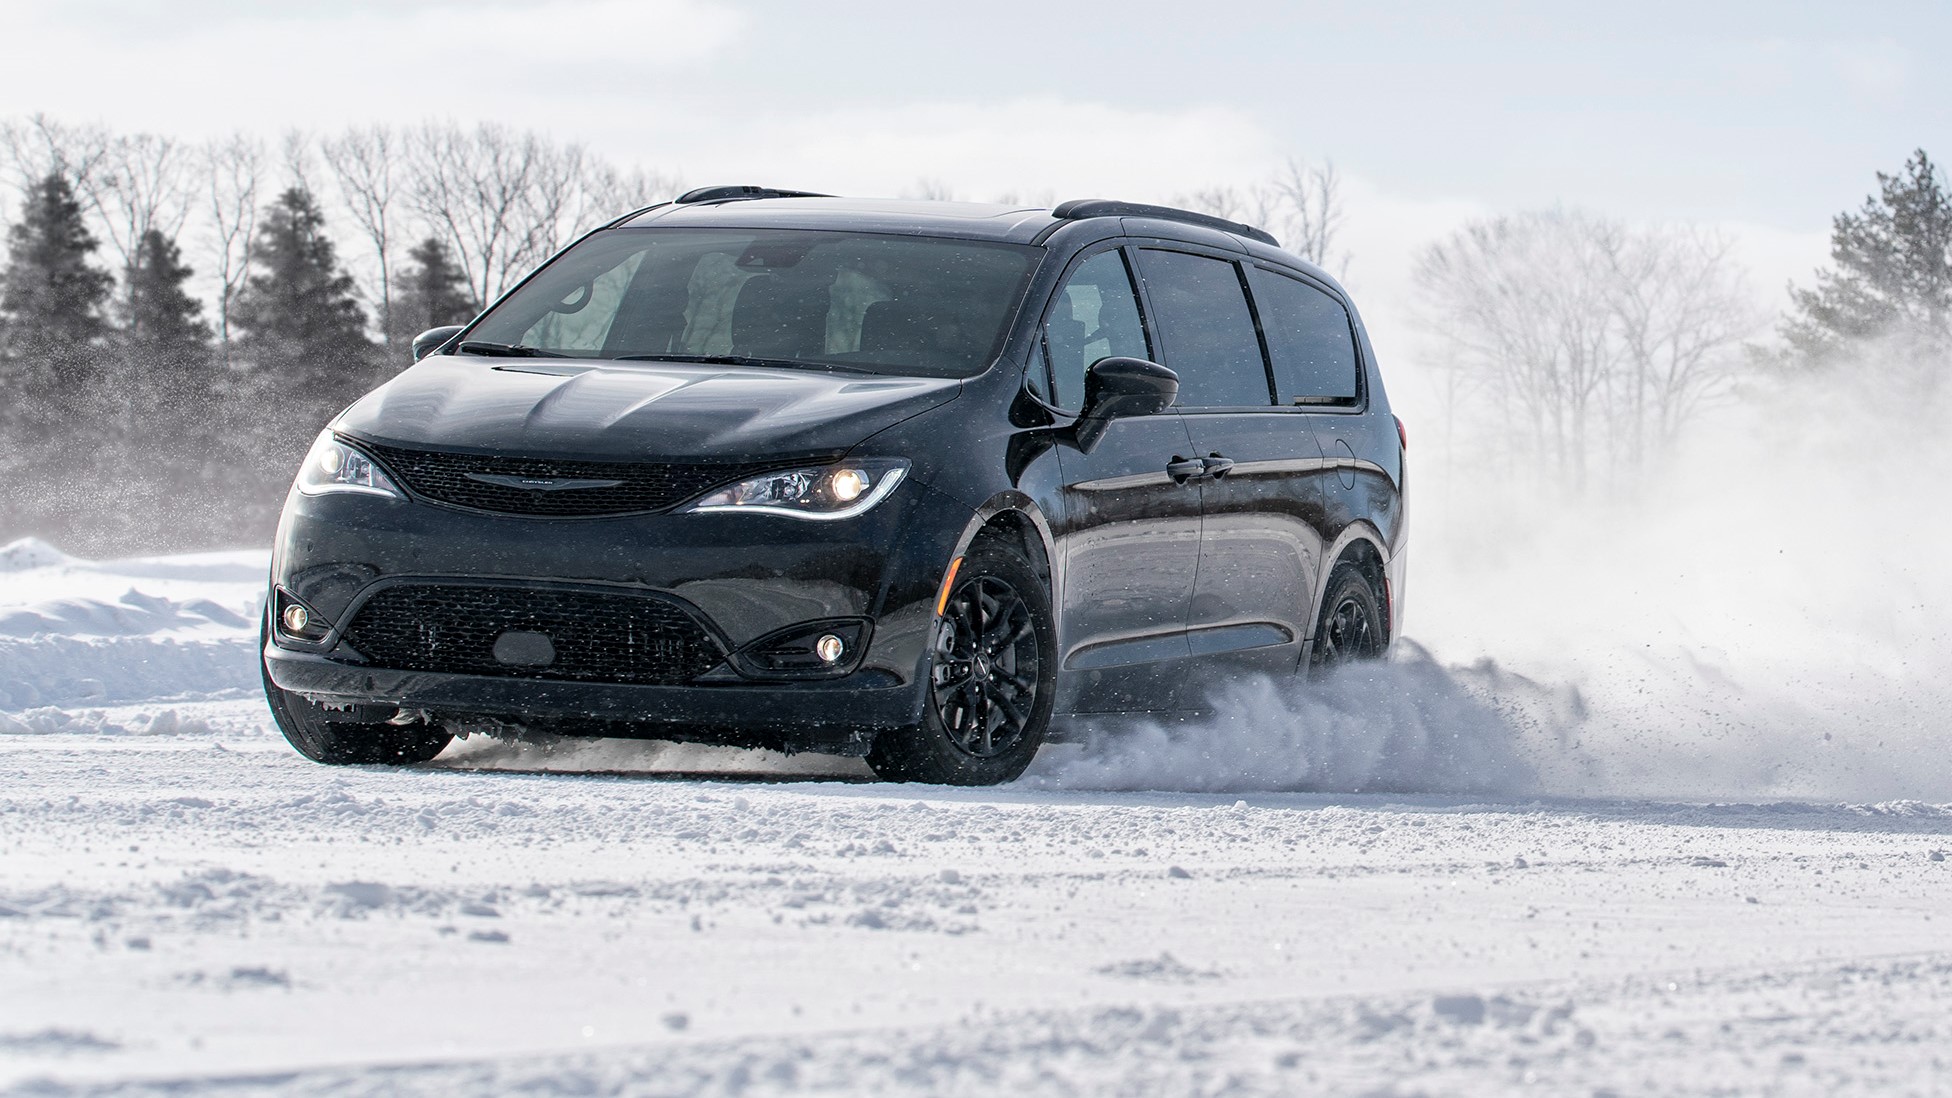 2020 Chrysler Pacifica Launch Edition Signals Return to AWD Minivans